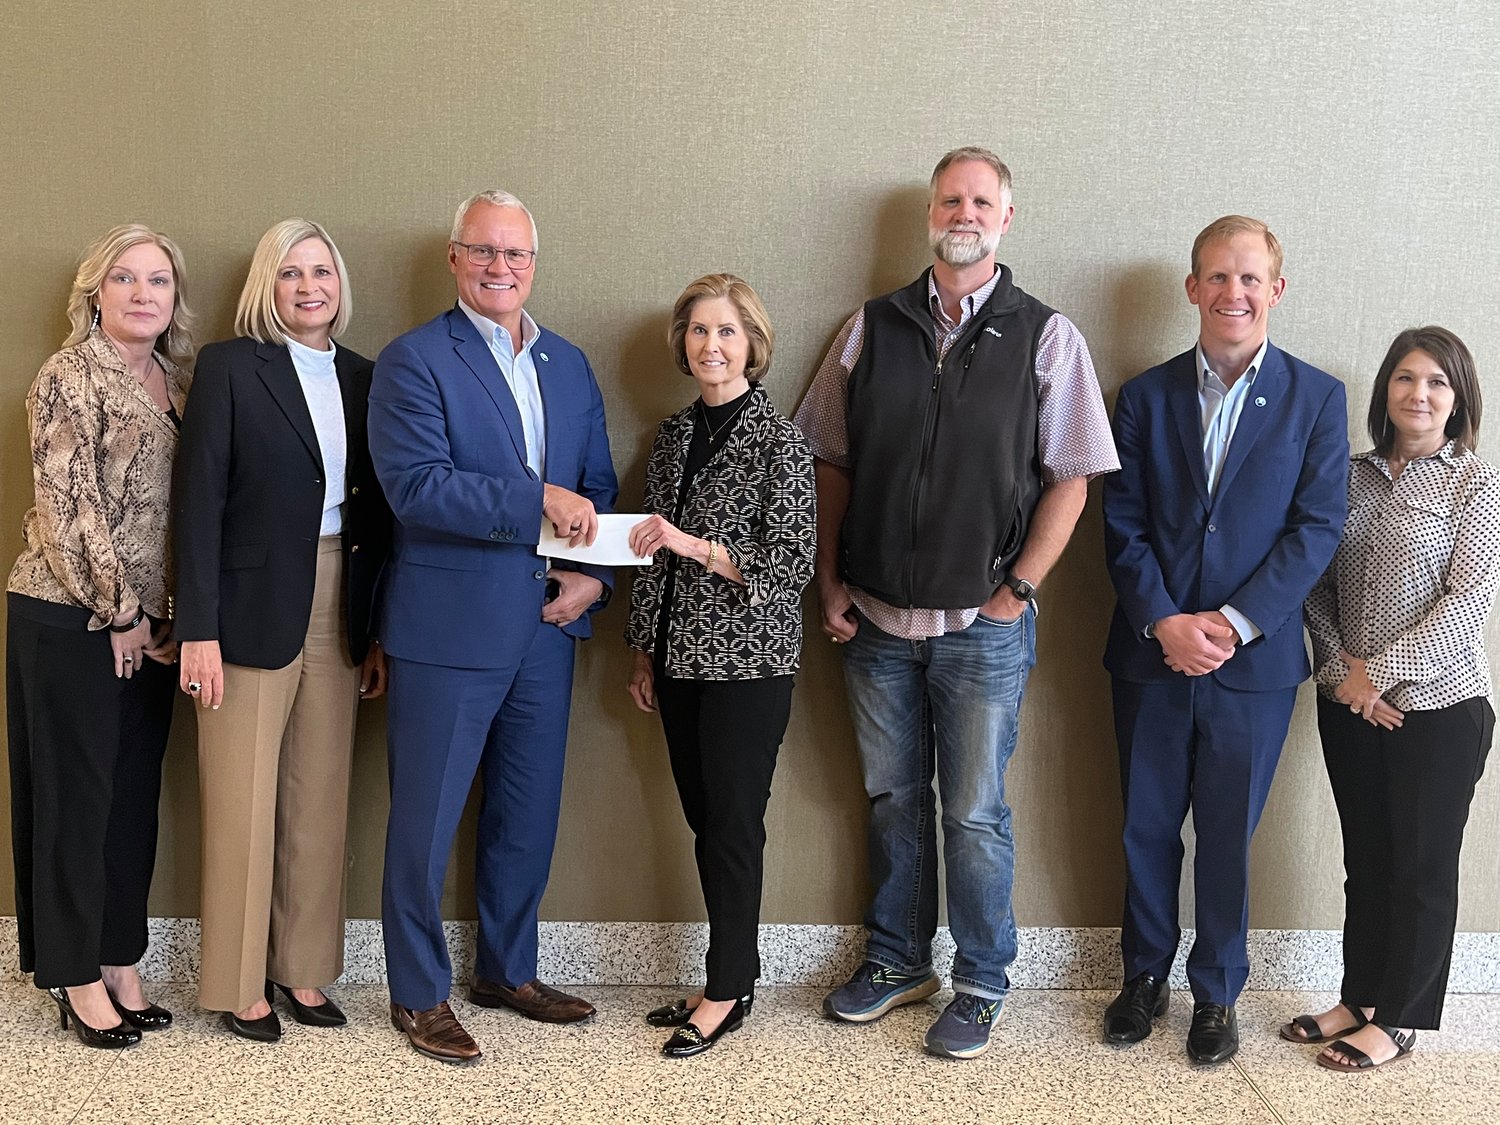 Origin Bank made a donation to Quitman Christmas Sharing, Plus recently. Pictured are, from left, Kelly Harris, Kori Sirman, Drake Mills-chairman, president of CEO of Origin, Beth Merlin, Dave Simpkins and Missy Kirby.